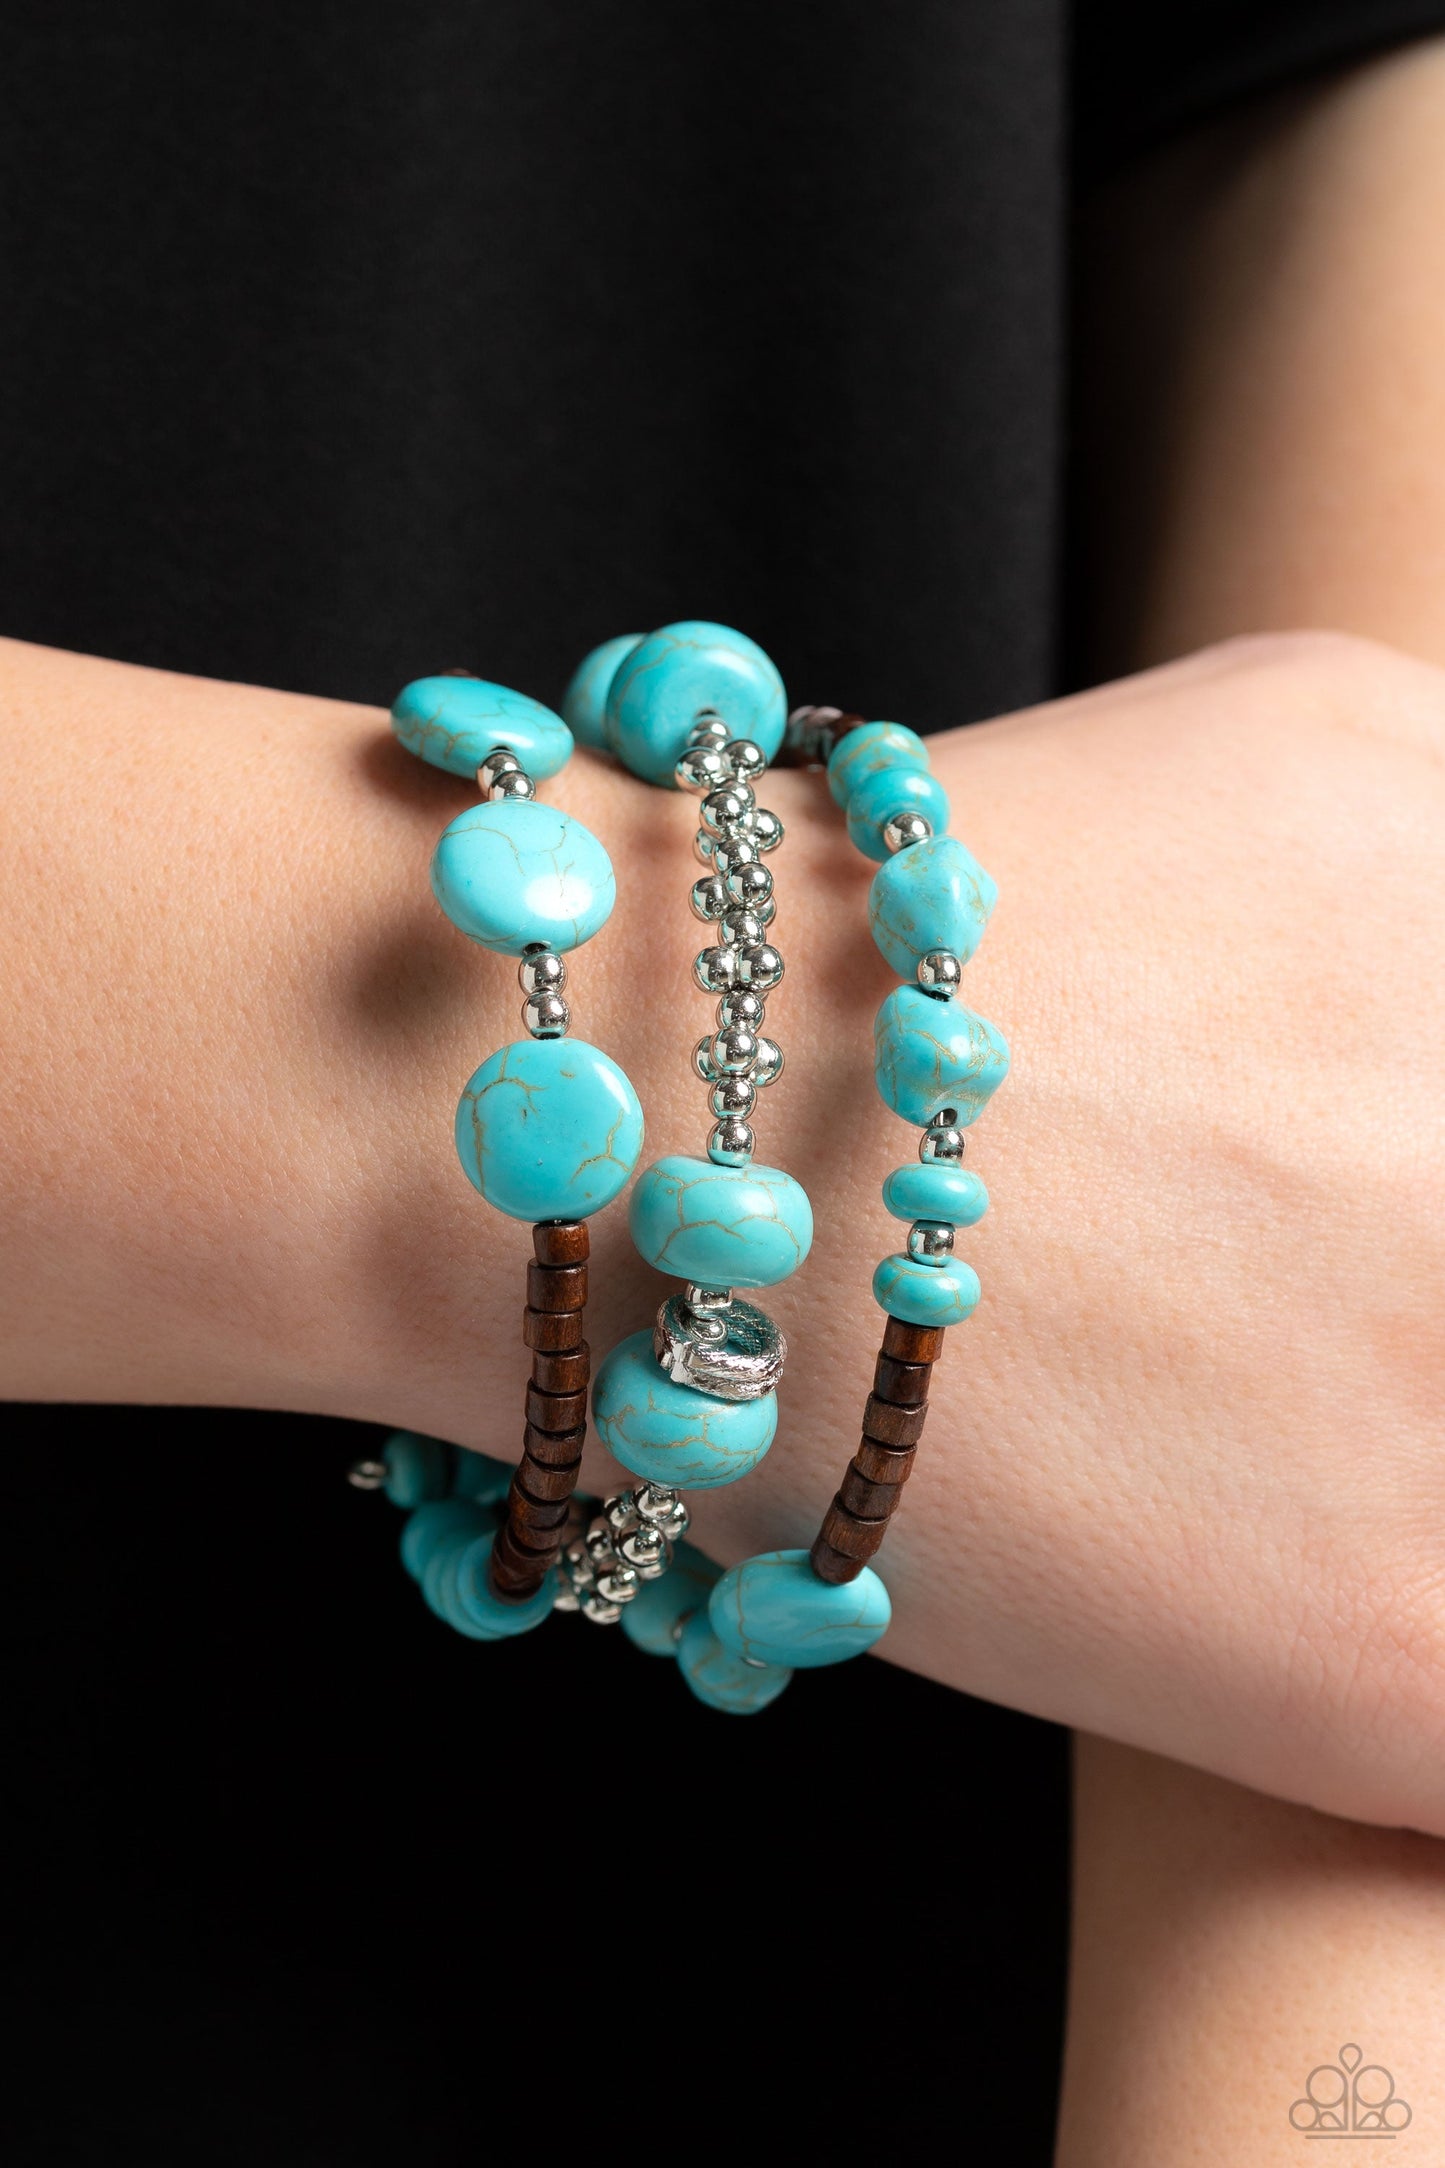 Operation Outdoors - Blue/Turquoise Stones, Wooden Beads, & Silver Accent Paparazzi Cuff Bracelet